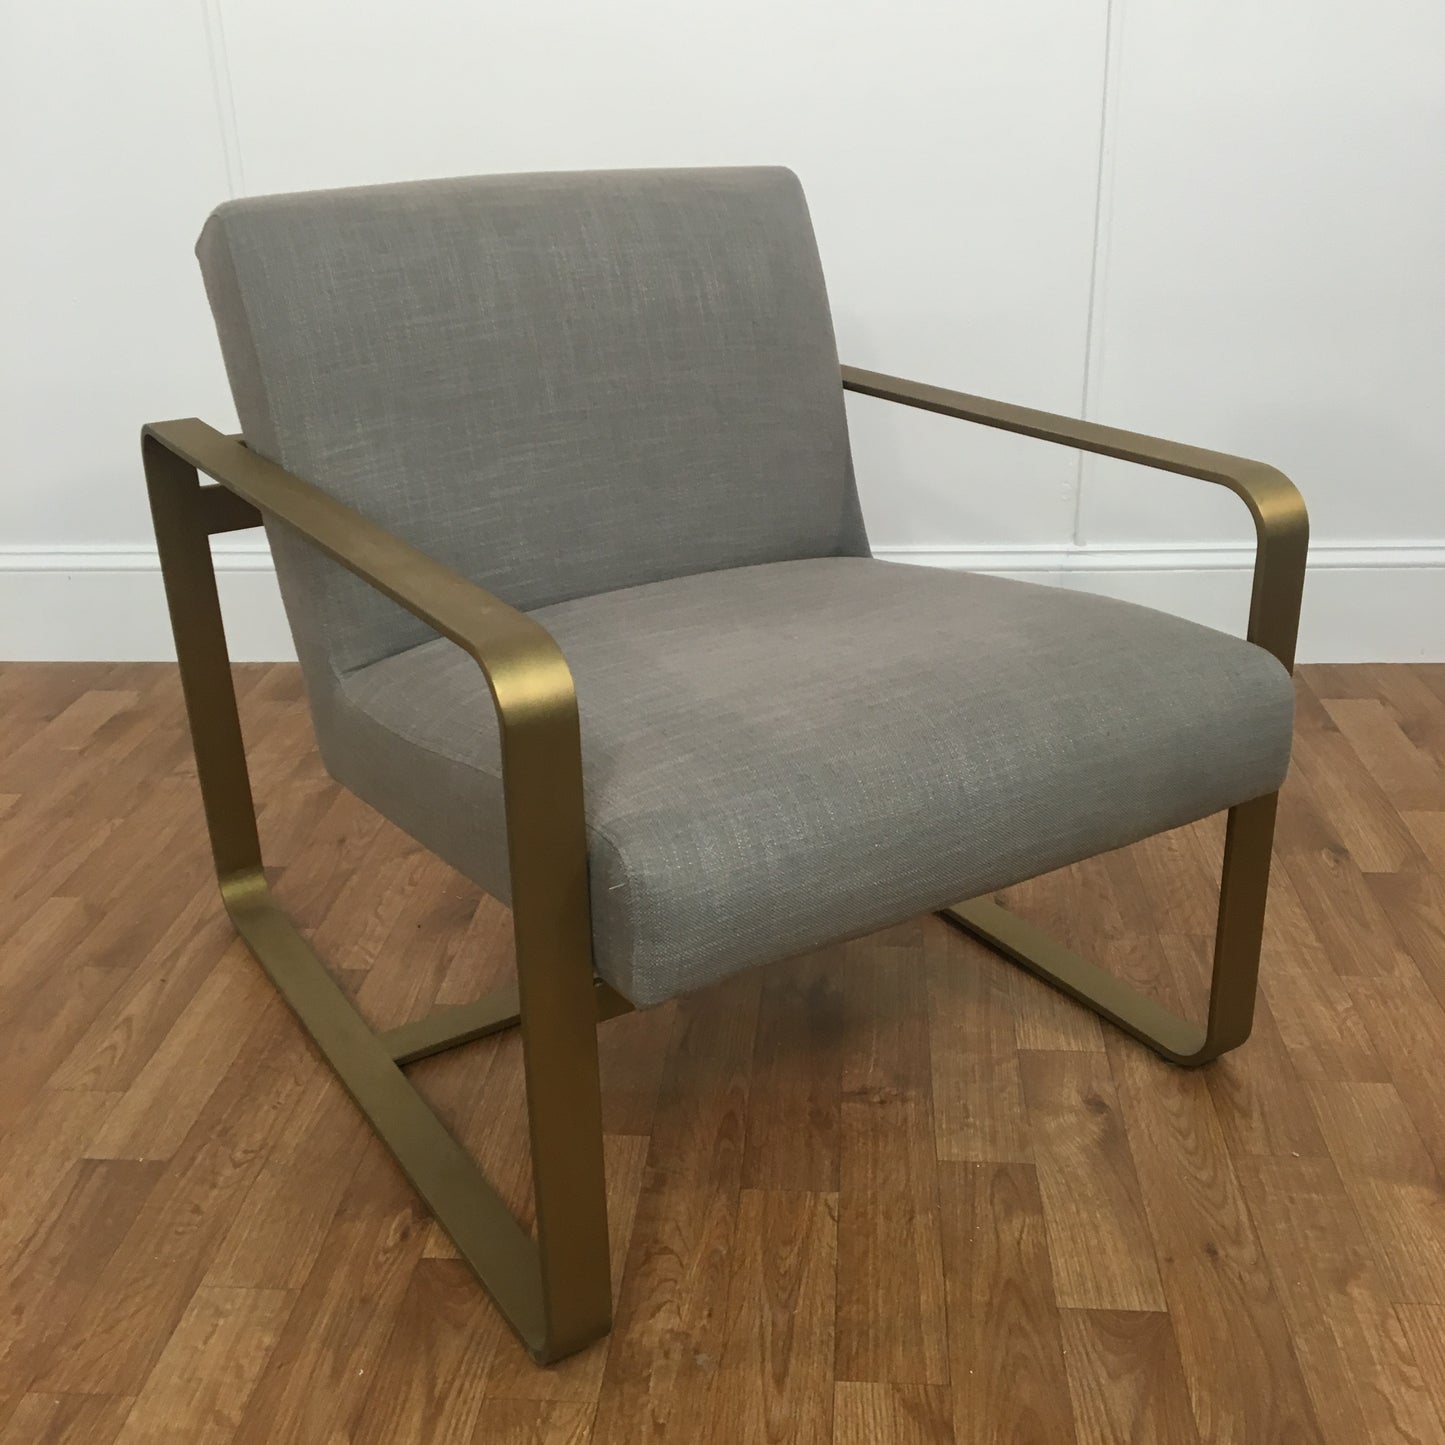 GRAY LINEN AND BRUSH GOLD ARM CHAIR WITH OTTOMAN